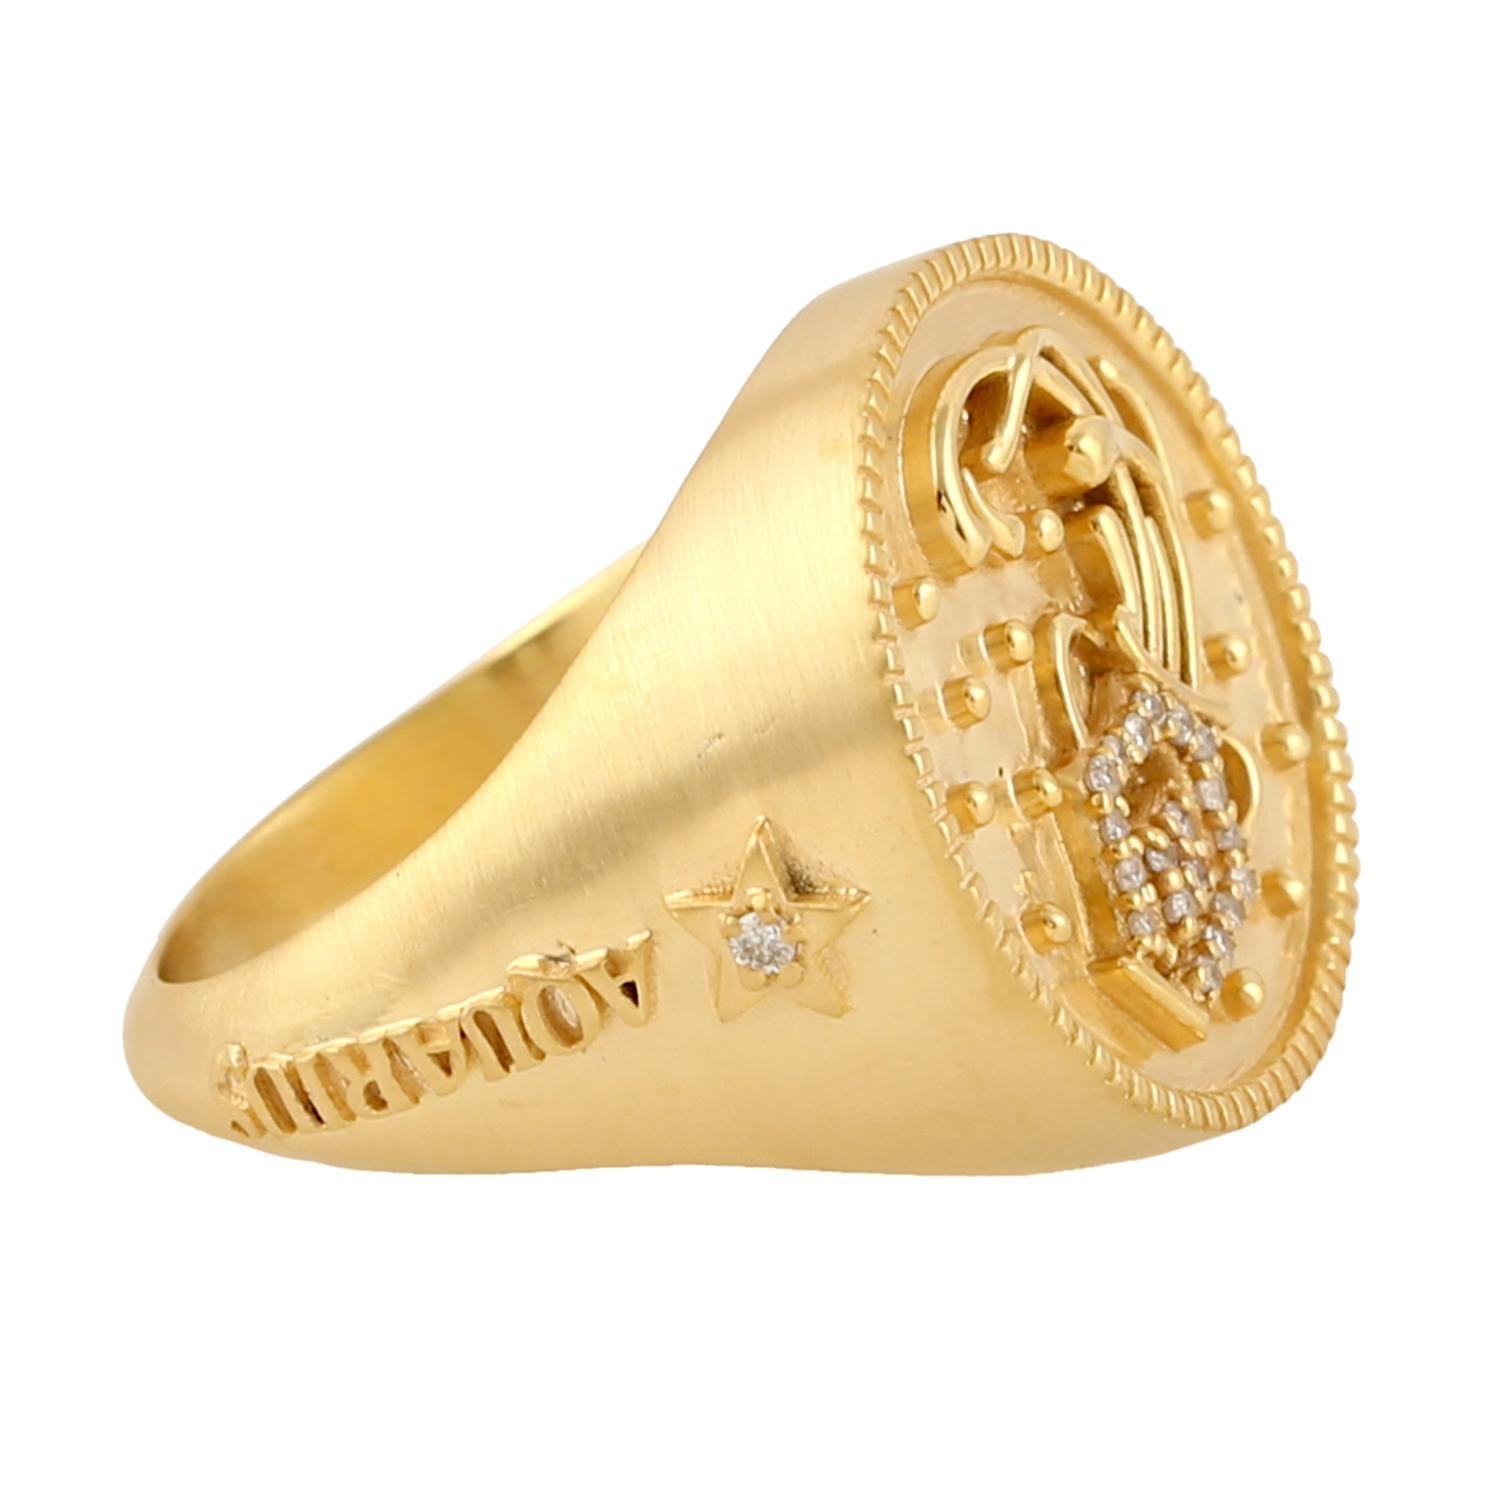 Art Deco Aquarius Sunsign Zodiac Ring with Pave Diamonds Made in 14k Gold For Sale